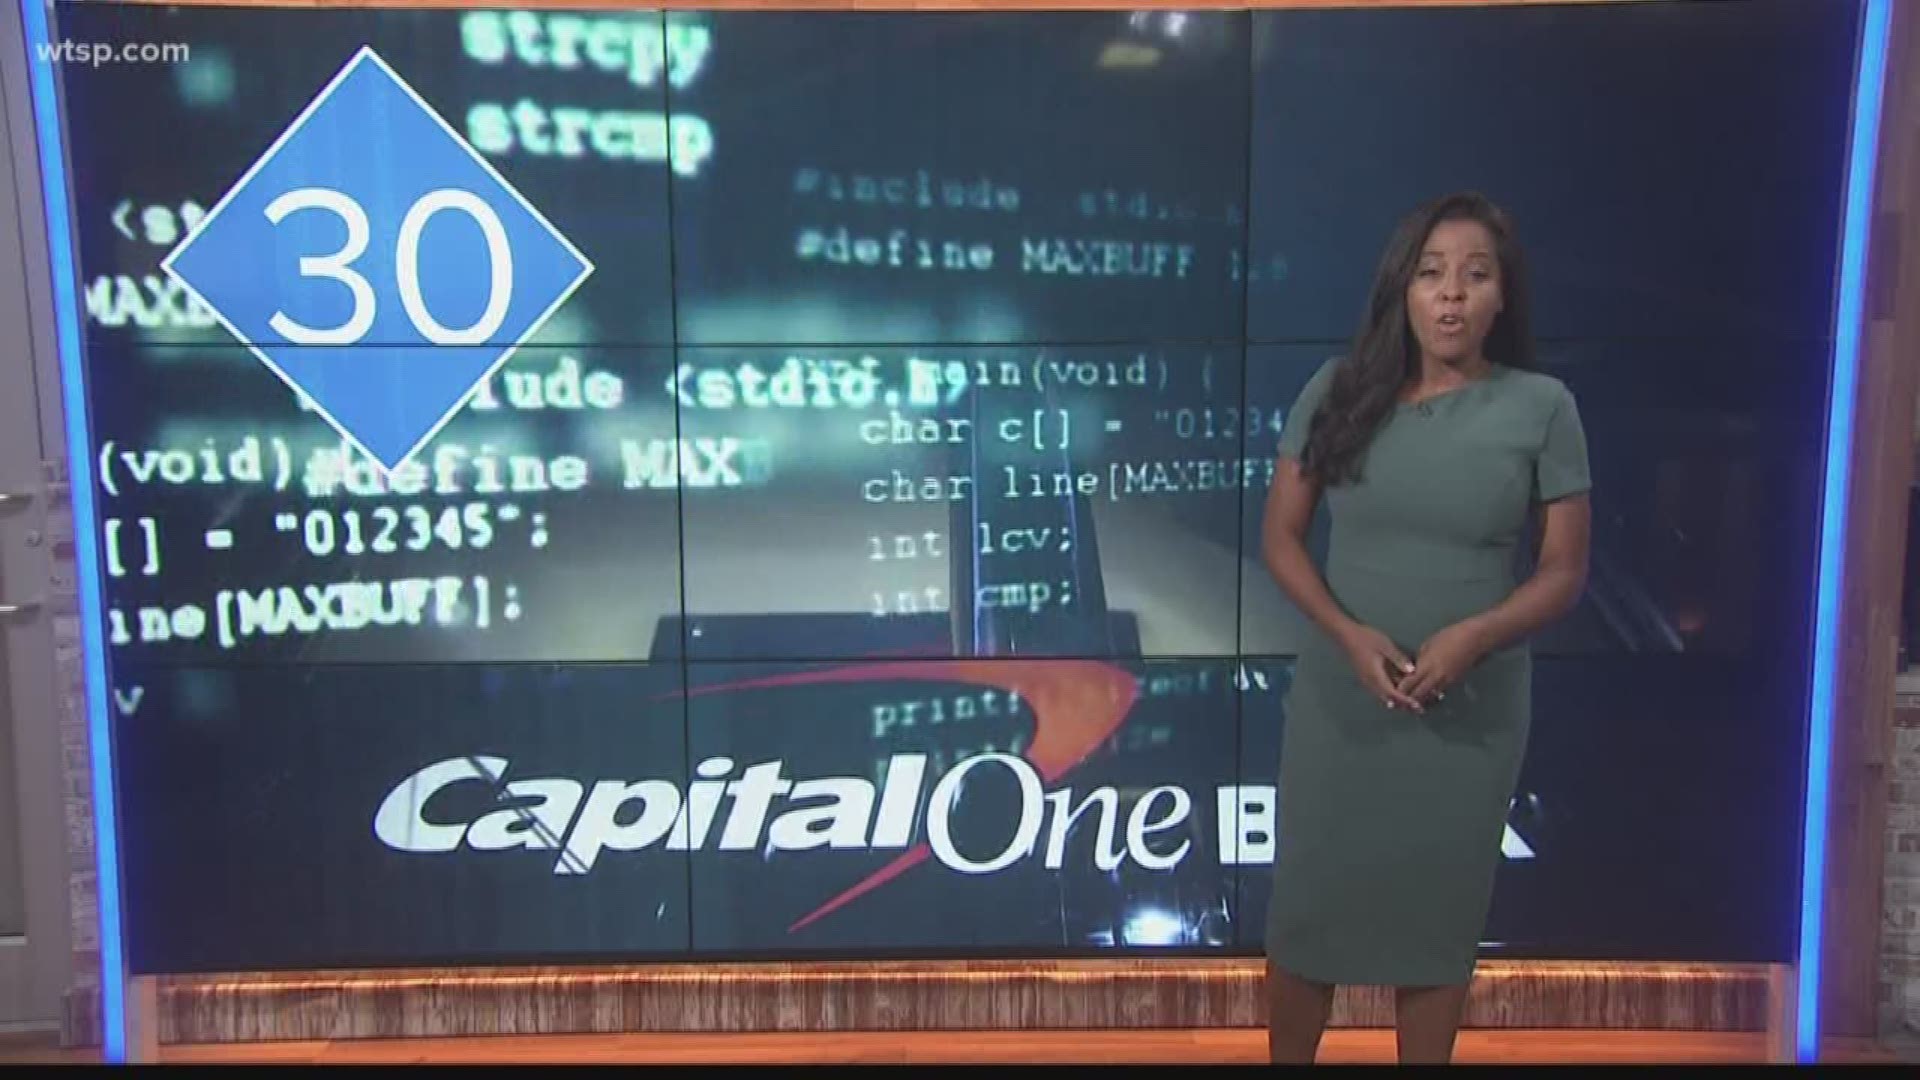 Thirty more companies linked to the massive Capital One hack. The FCC is moving ahead with making 988 a number to connect people considering suicide with a crisis line. And Allegiant Air is adding eight new flights from Sarasota-Bradenton Airport.